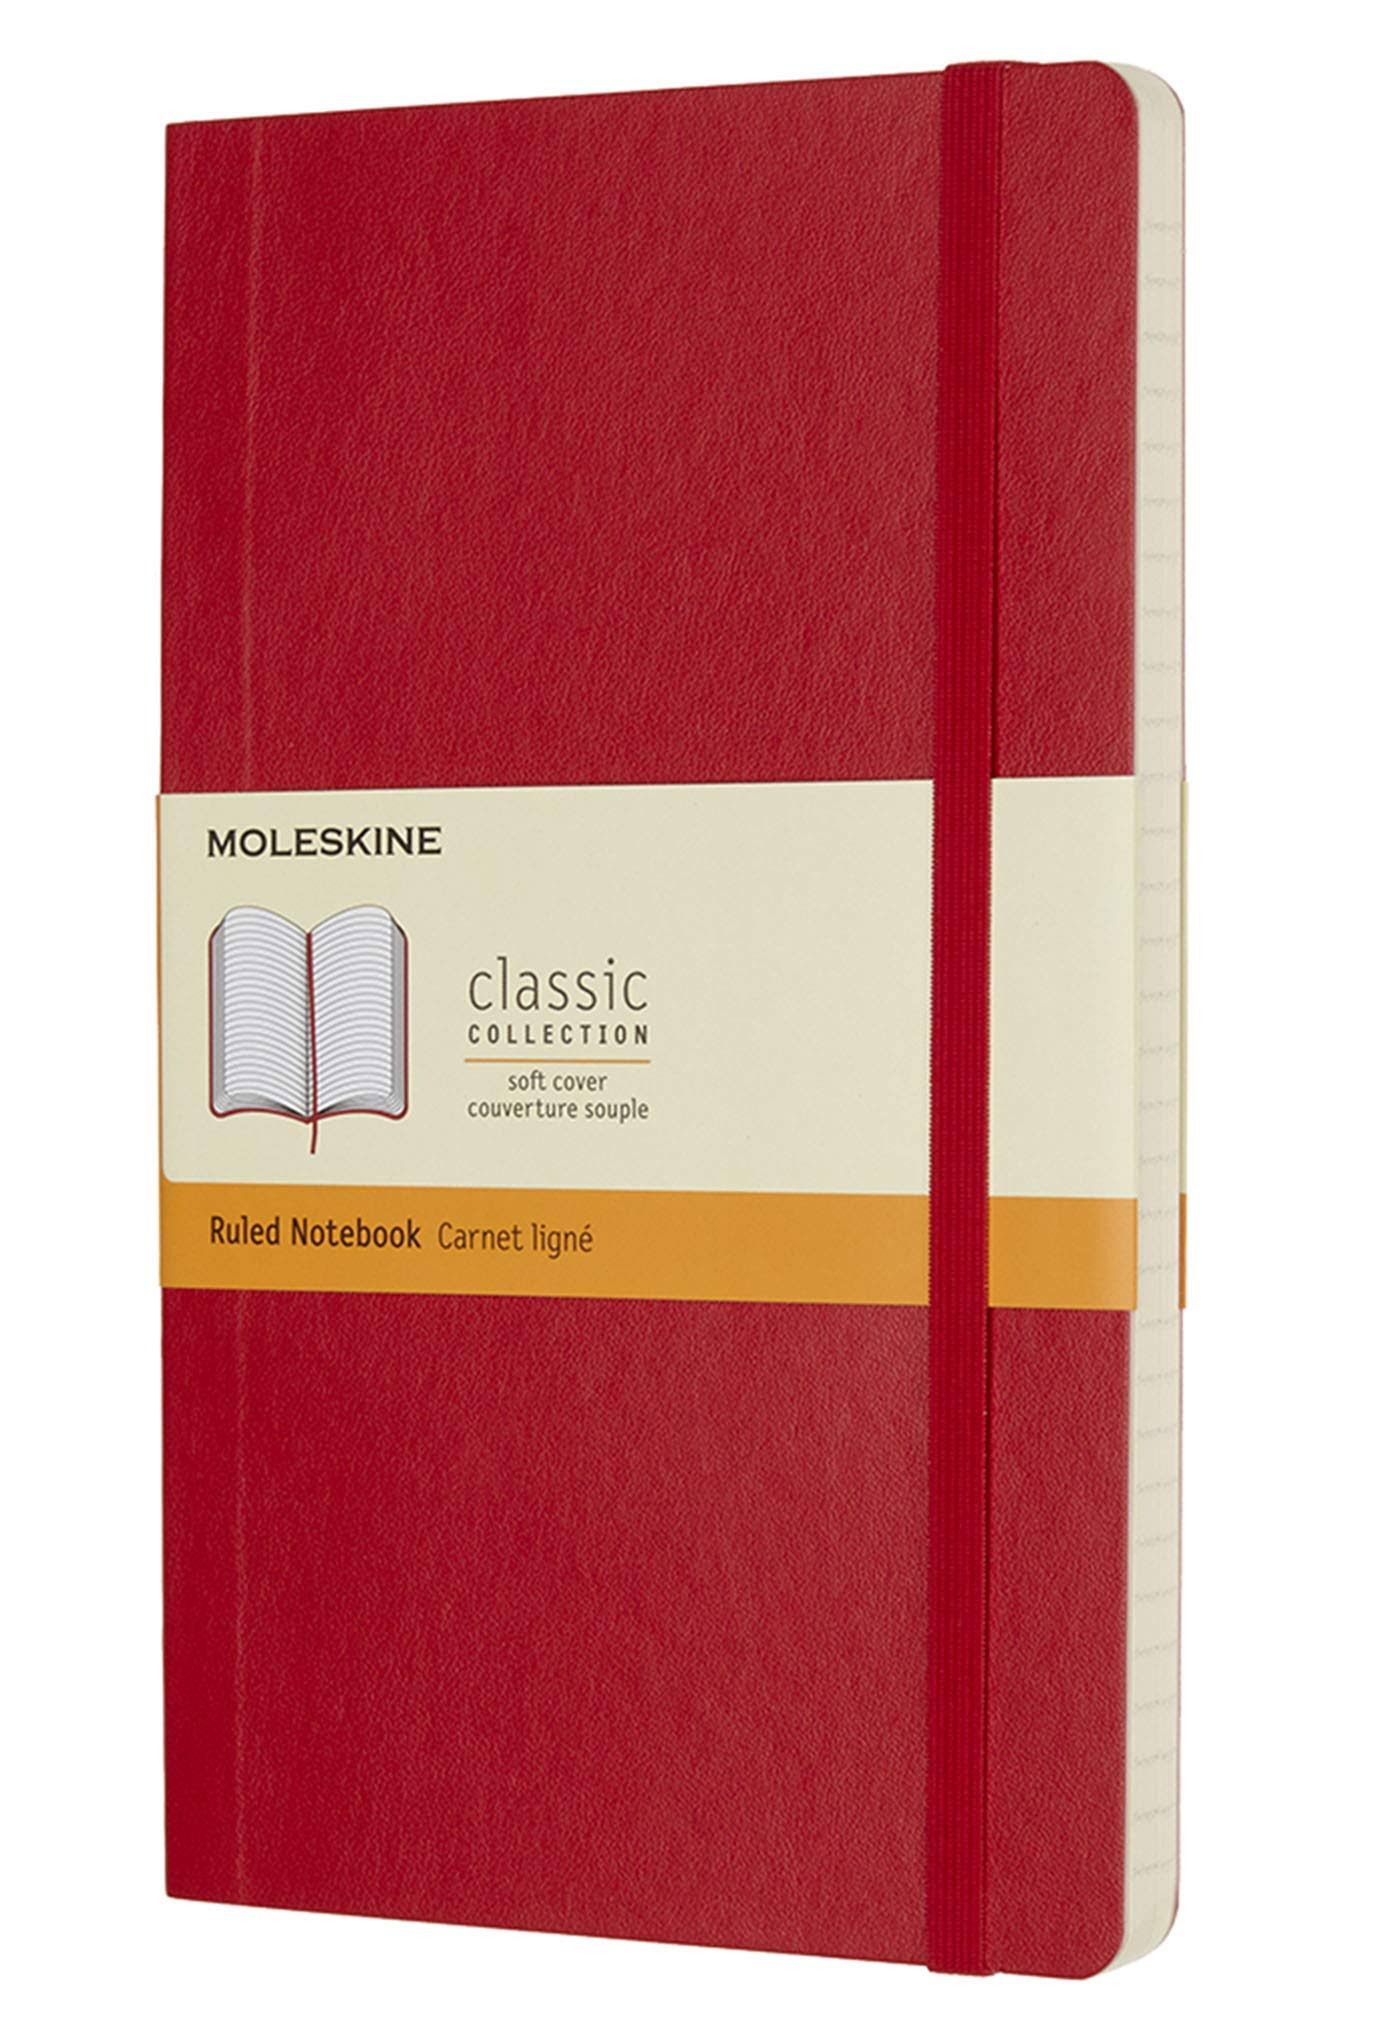 Moleskine Softcover Ruled Large Notebook - Scarlet Red